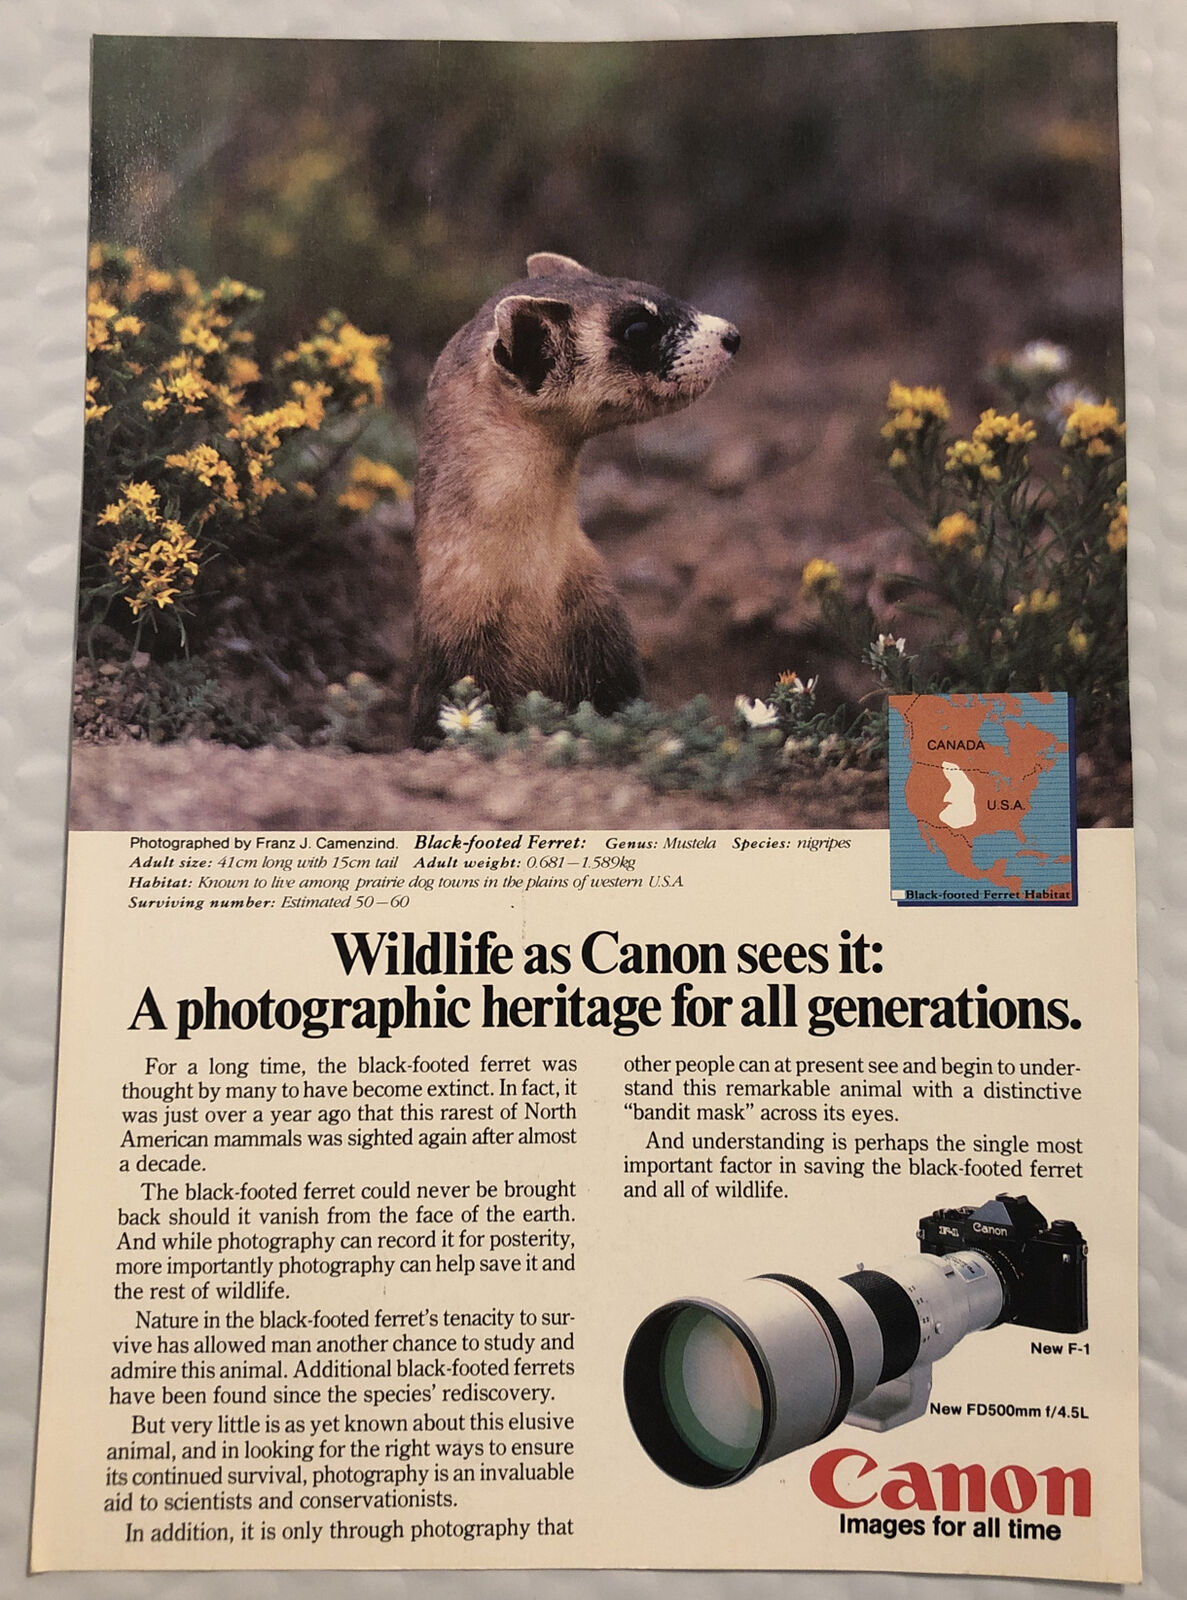 Vintage 1983 Canon Cameras Original Print Ad Full Page - For All Generations